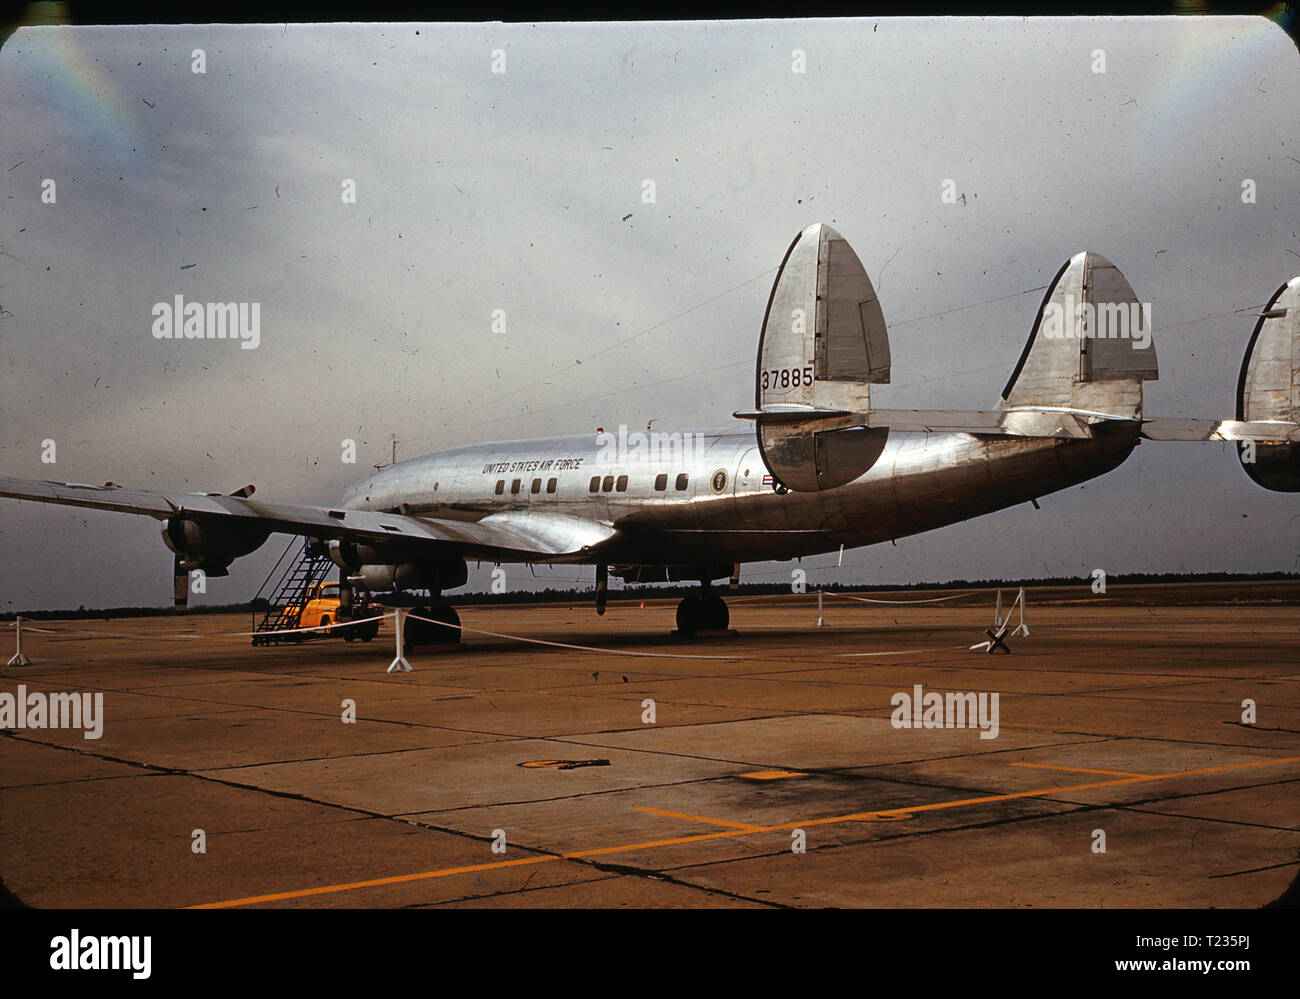 Dwight Eisenhower's presidential aircraft, Columbine III, at Spence Air Base, Moultrie, GA, in February 1959. Eisenhower used the Lockeed Constellation from 1954 to 1961. Columbine III was Eisenhower's third aircraft and the second plane to utilize the moniker Air Force One. In 1966 the Air Force retired the plane and moved it to the National Museum of the US Air Force at Wright-Patterson AFB, where it is still on display. Stock Photo